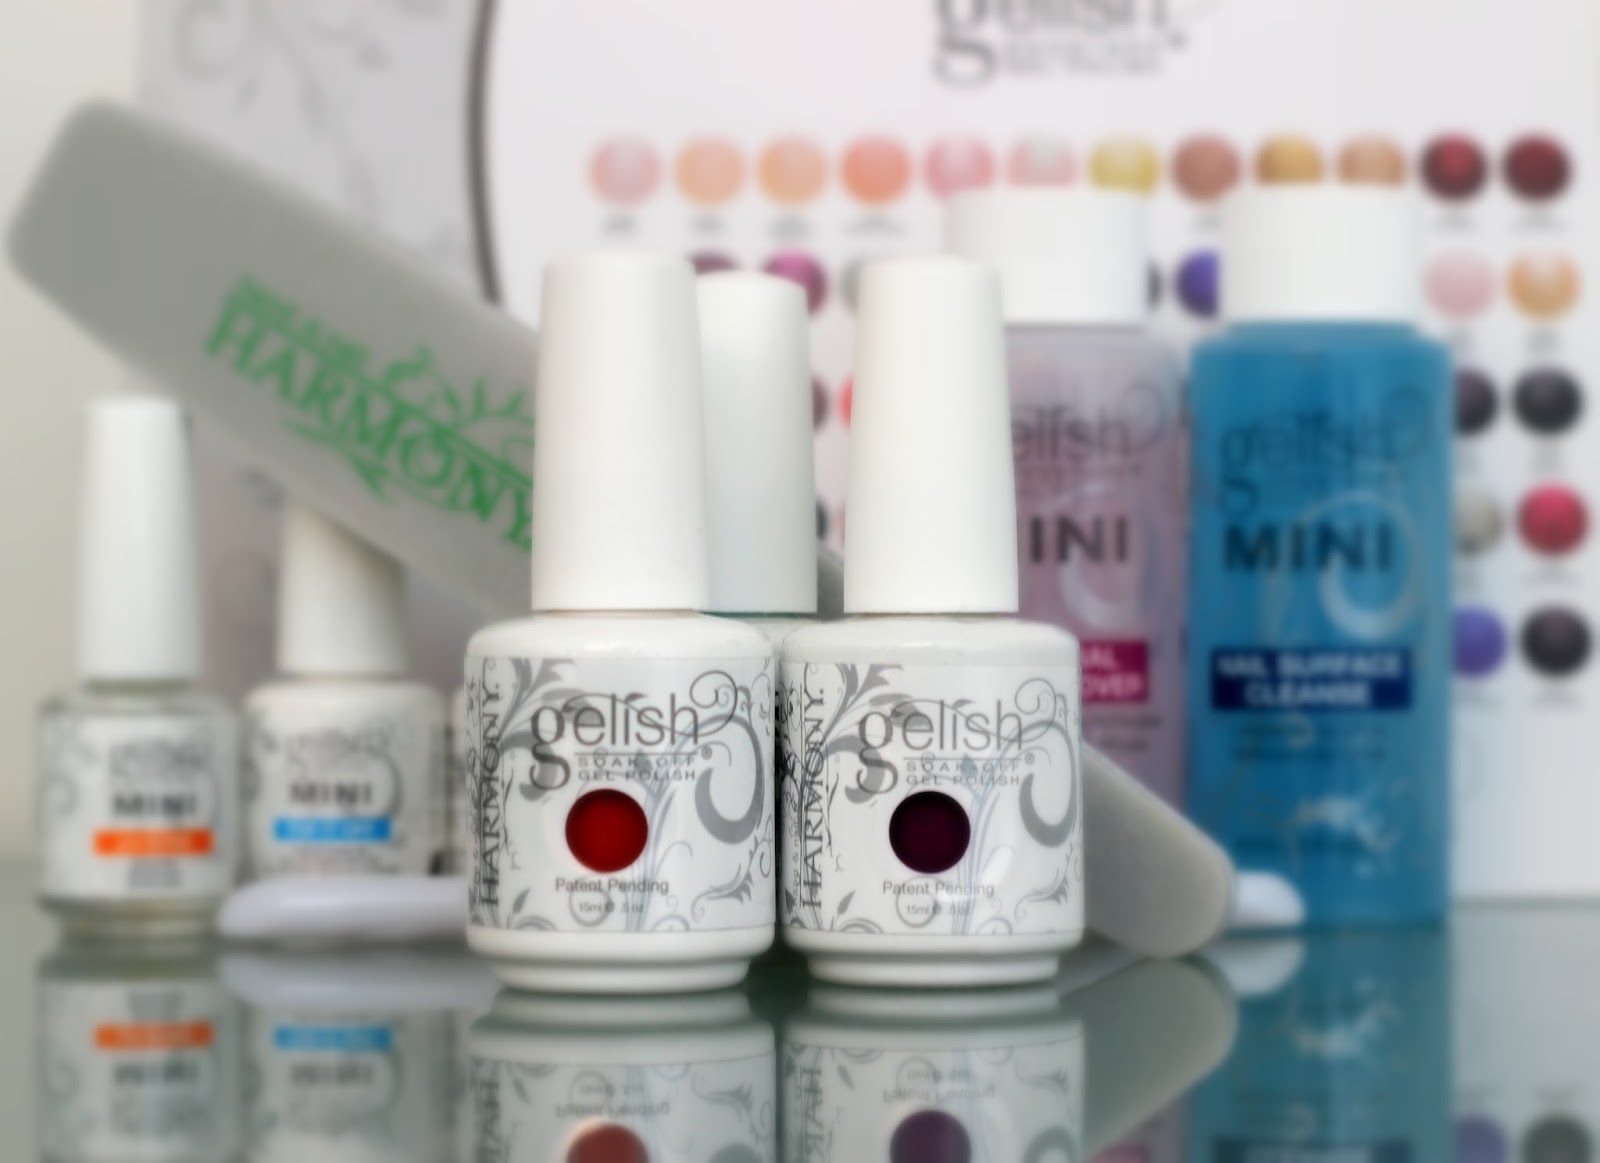 Gelish Brand Review